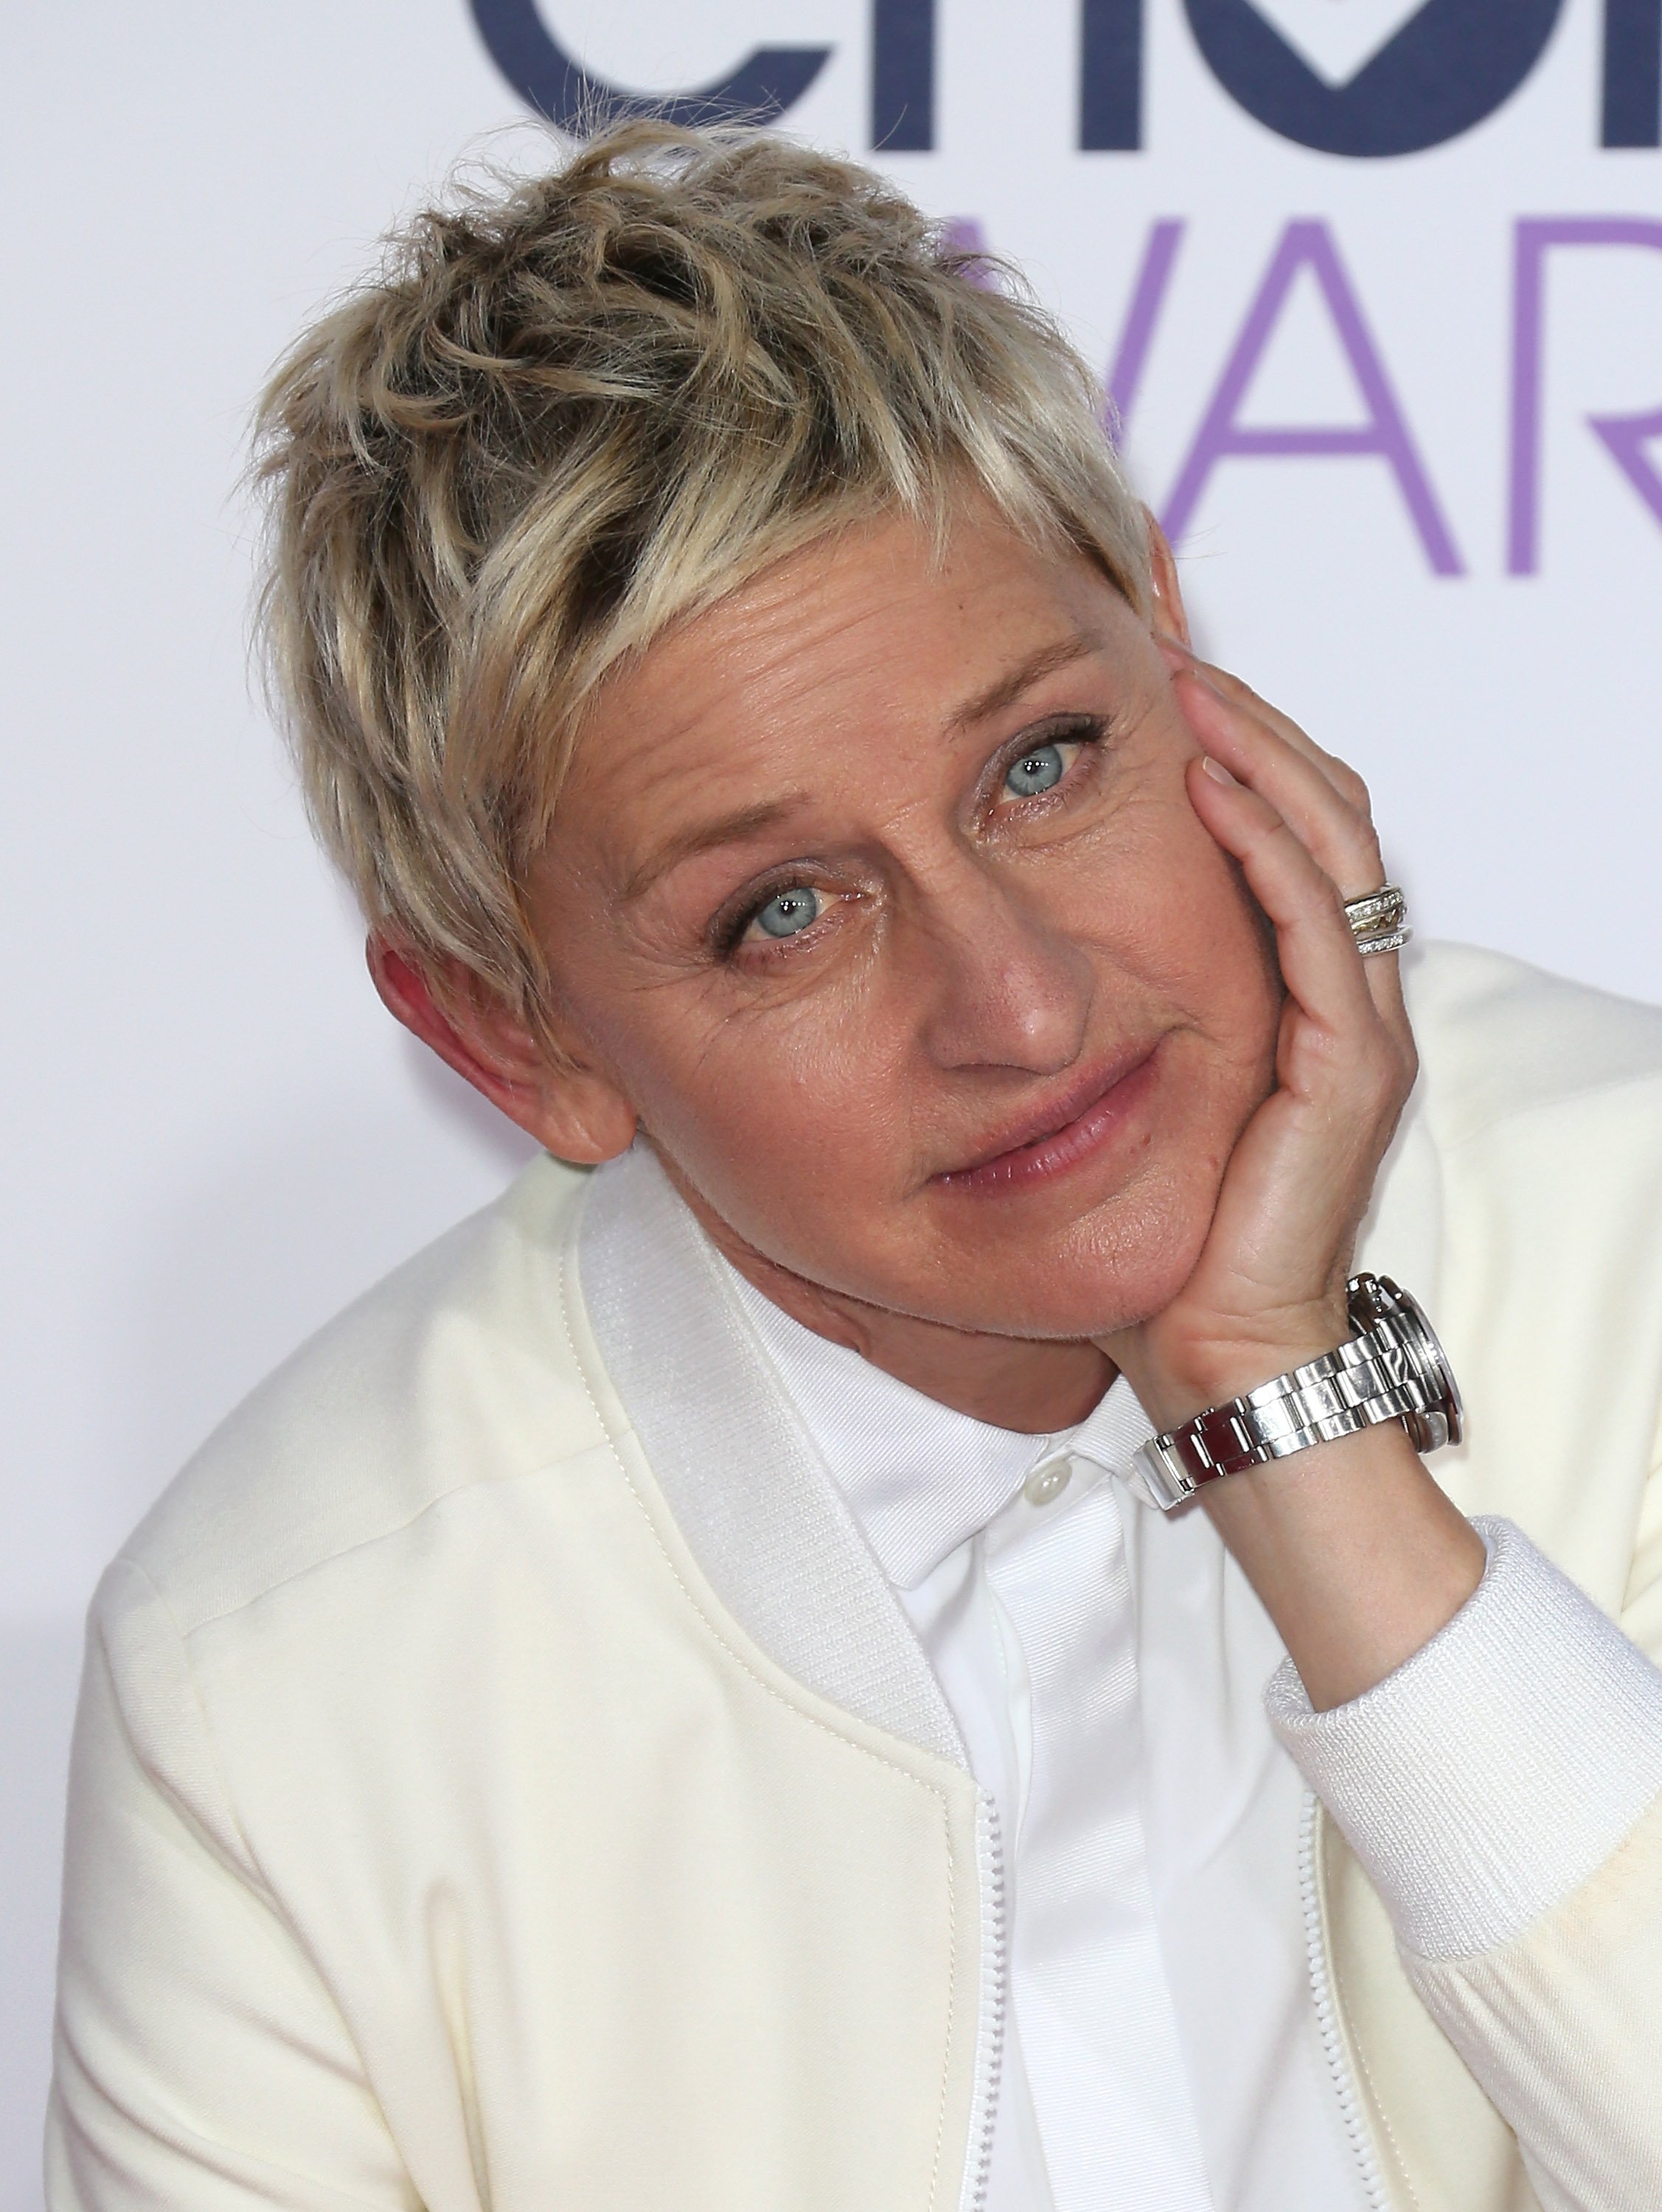 Ellen DeGeneres pictured at the People Choice Awards, 2015, Los Angeles, California. | Photo: Getty Images